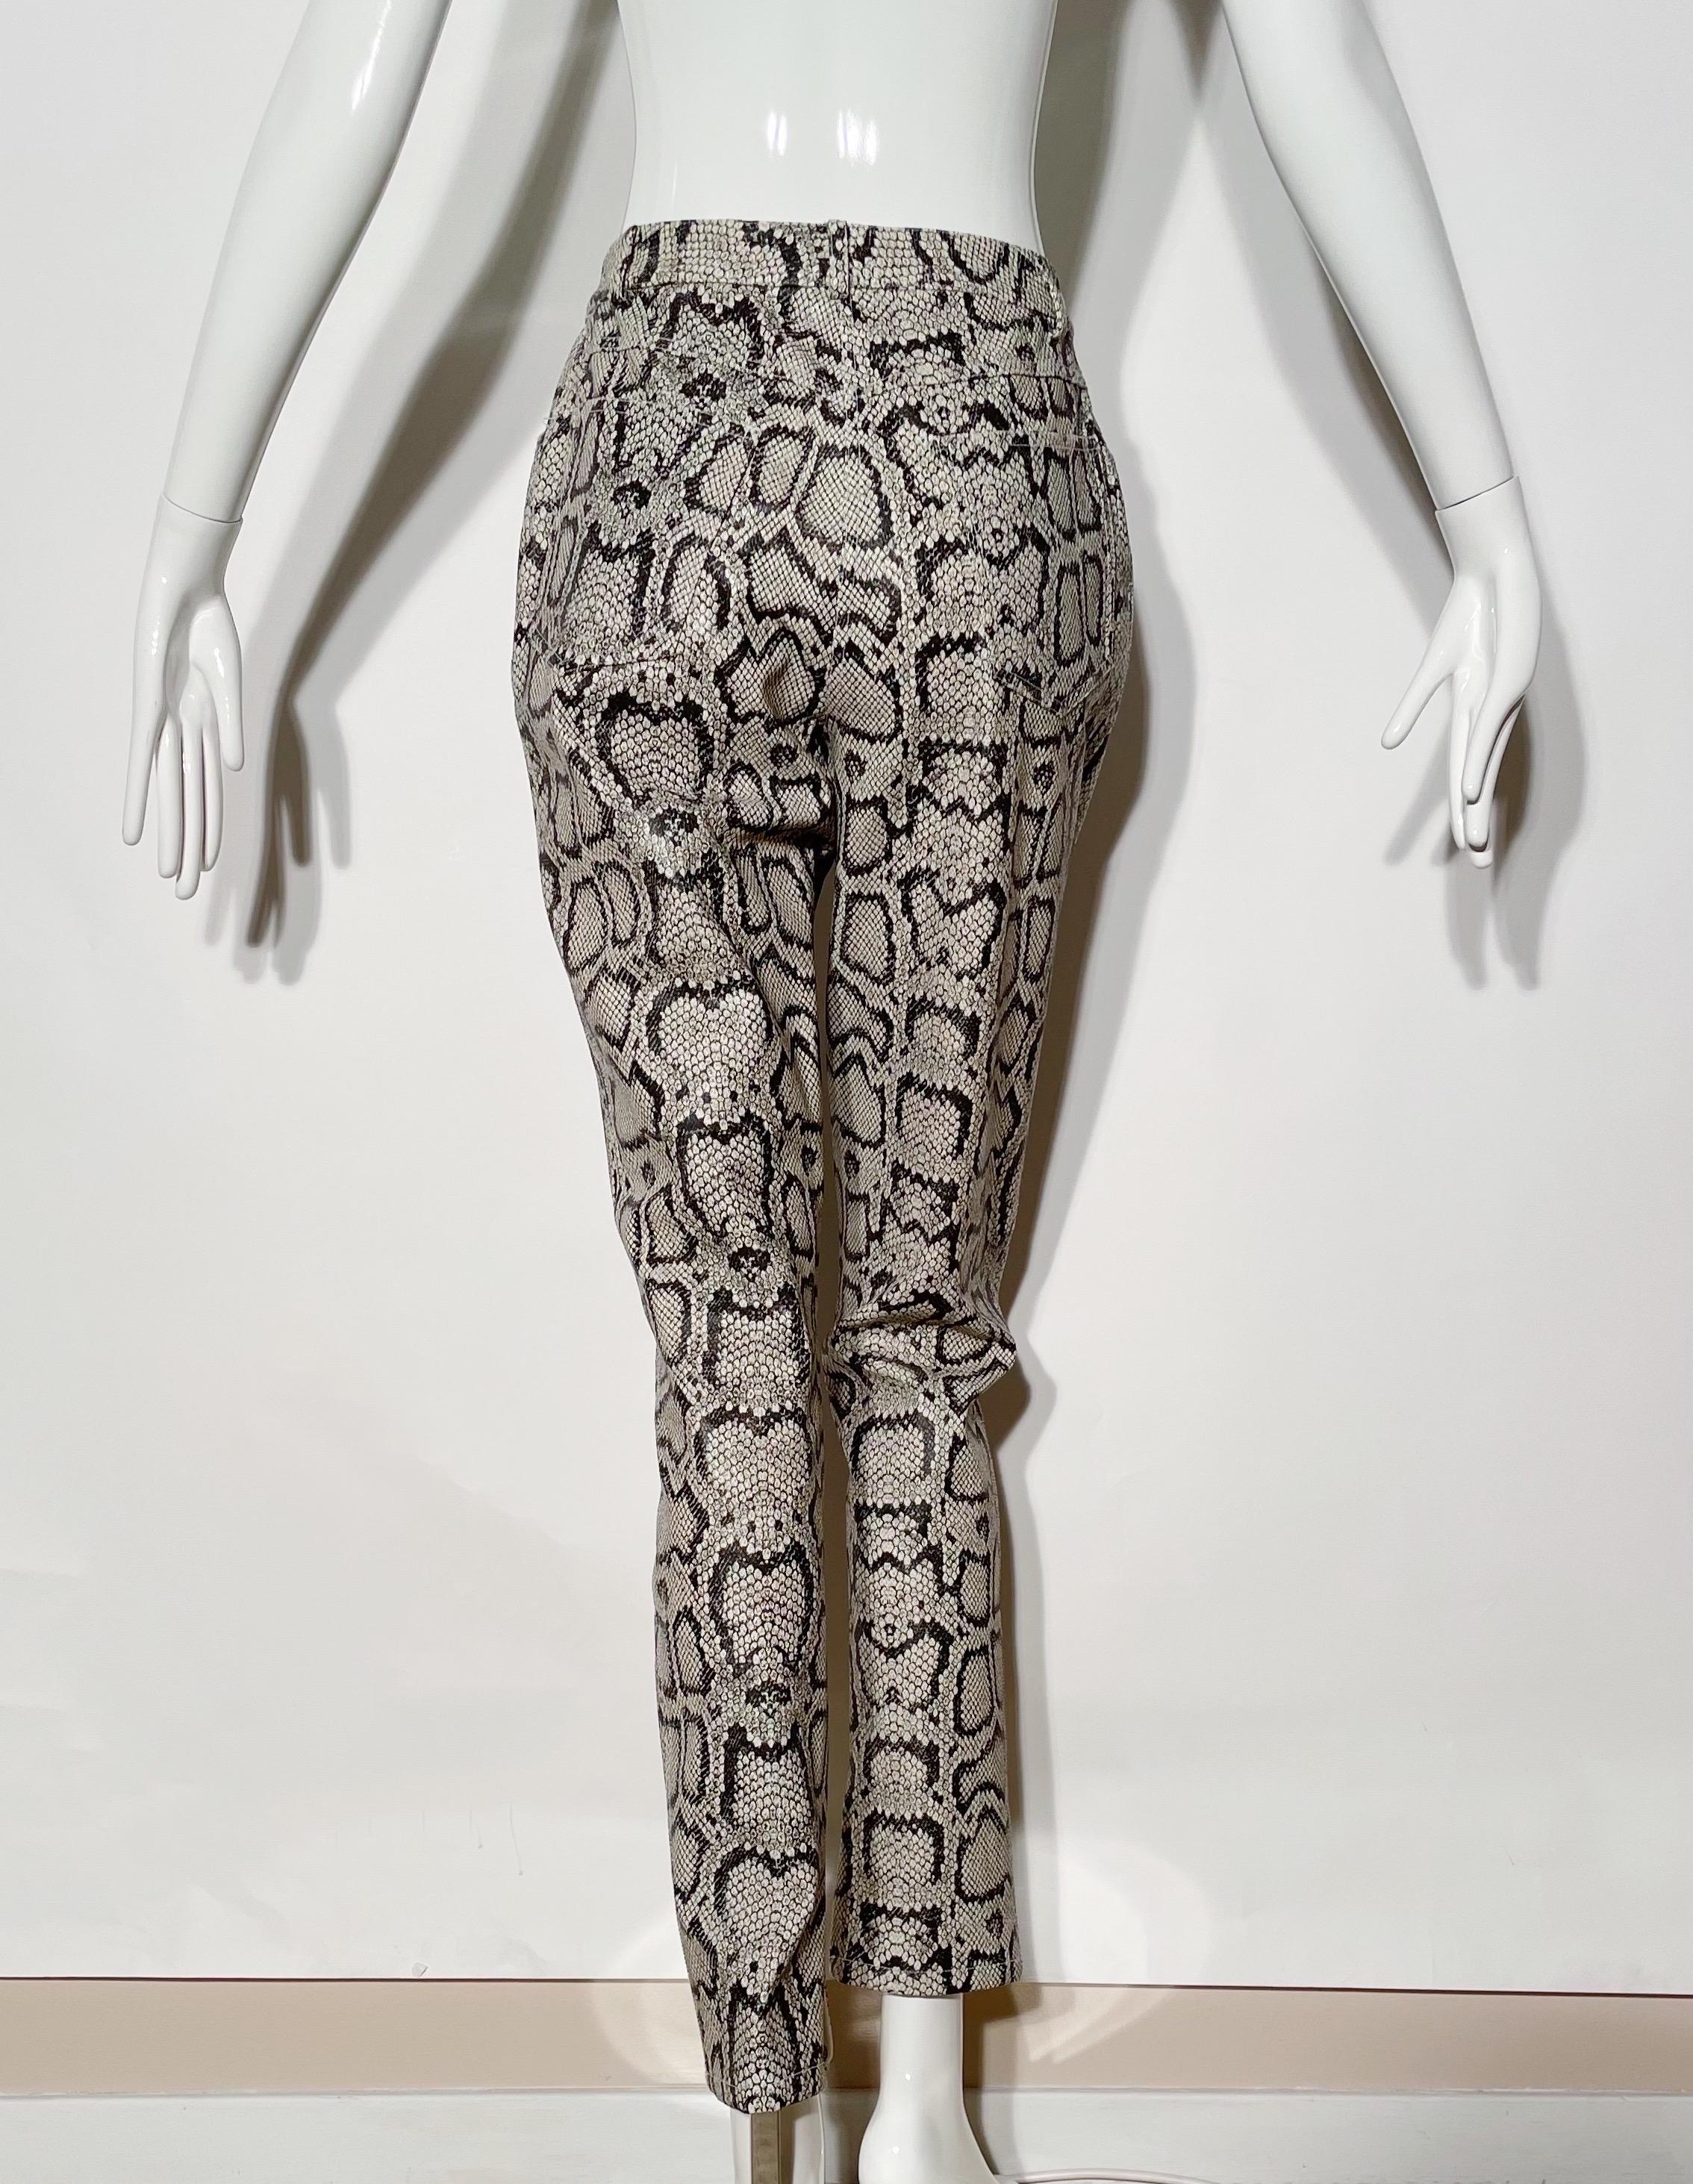 Emanuel Ungaro Faux Snakeskin Pants In Excellent Condition For Sale In Waterford, MI